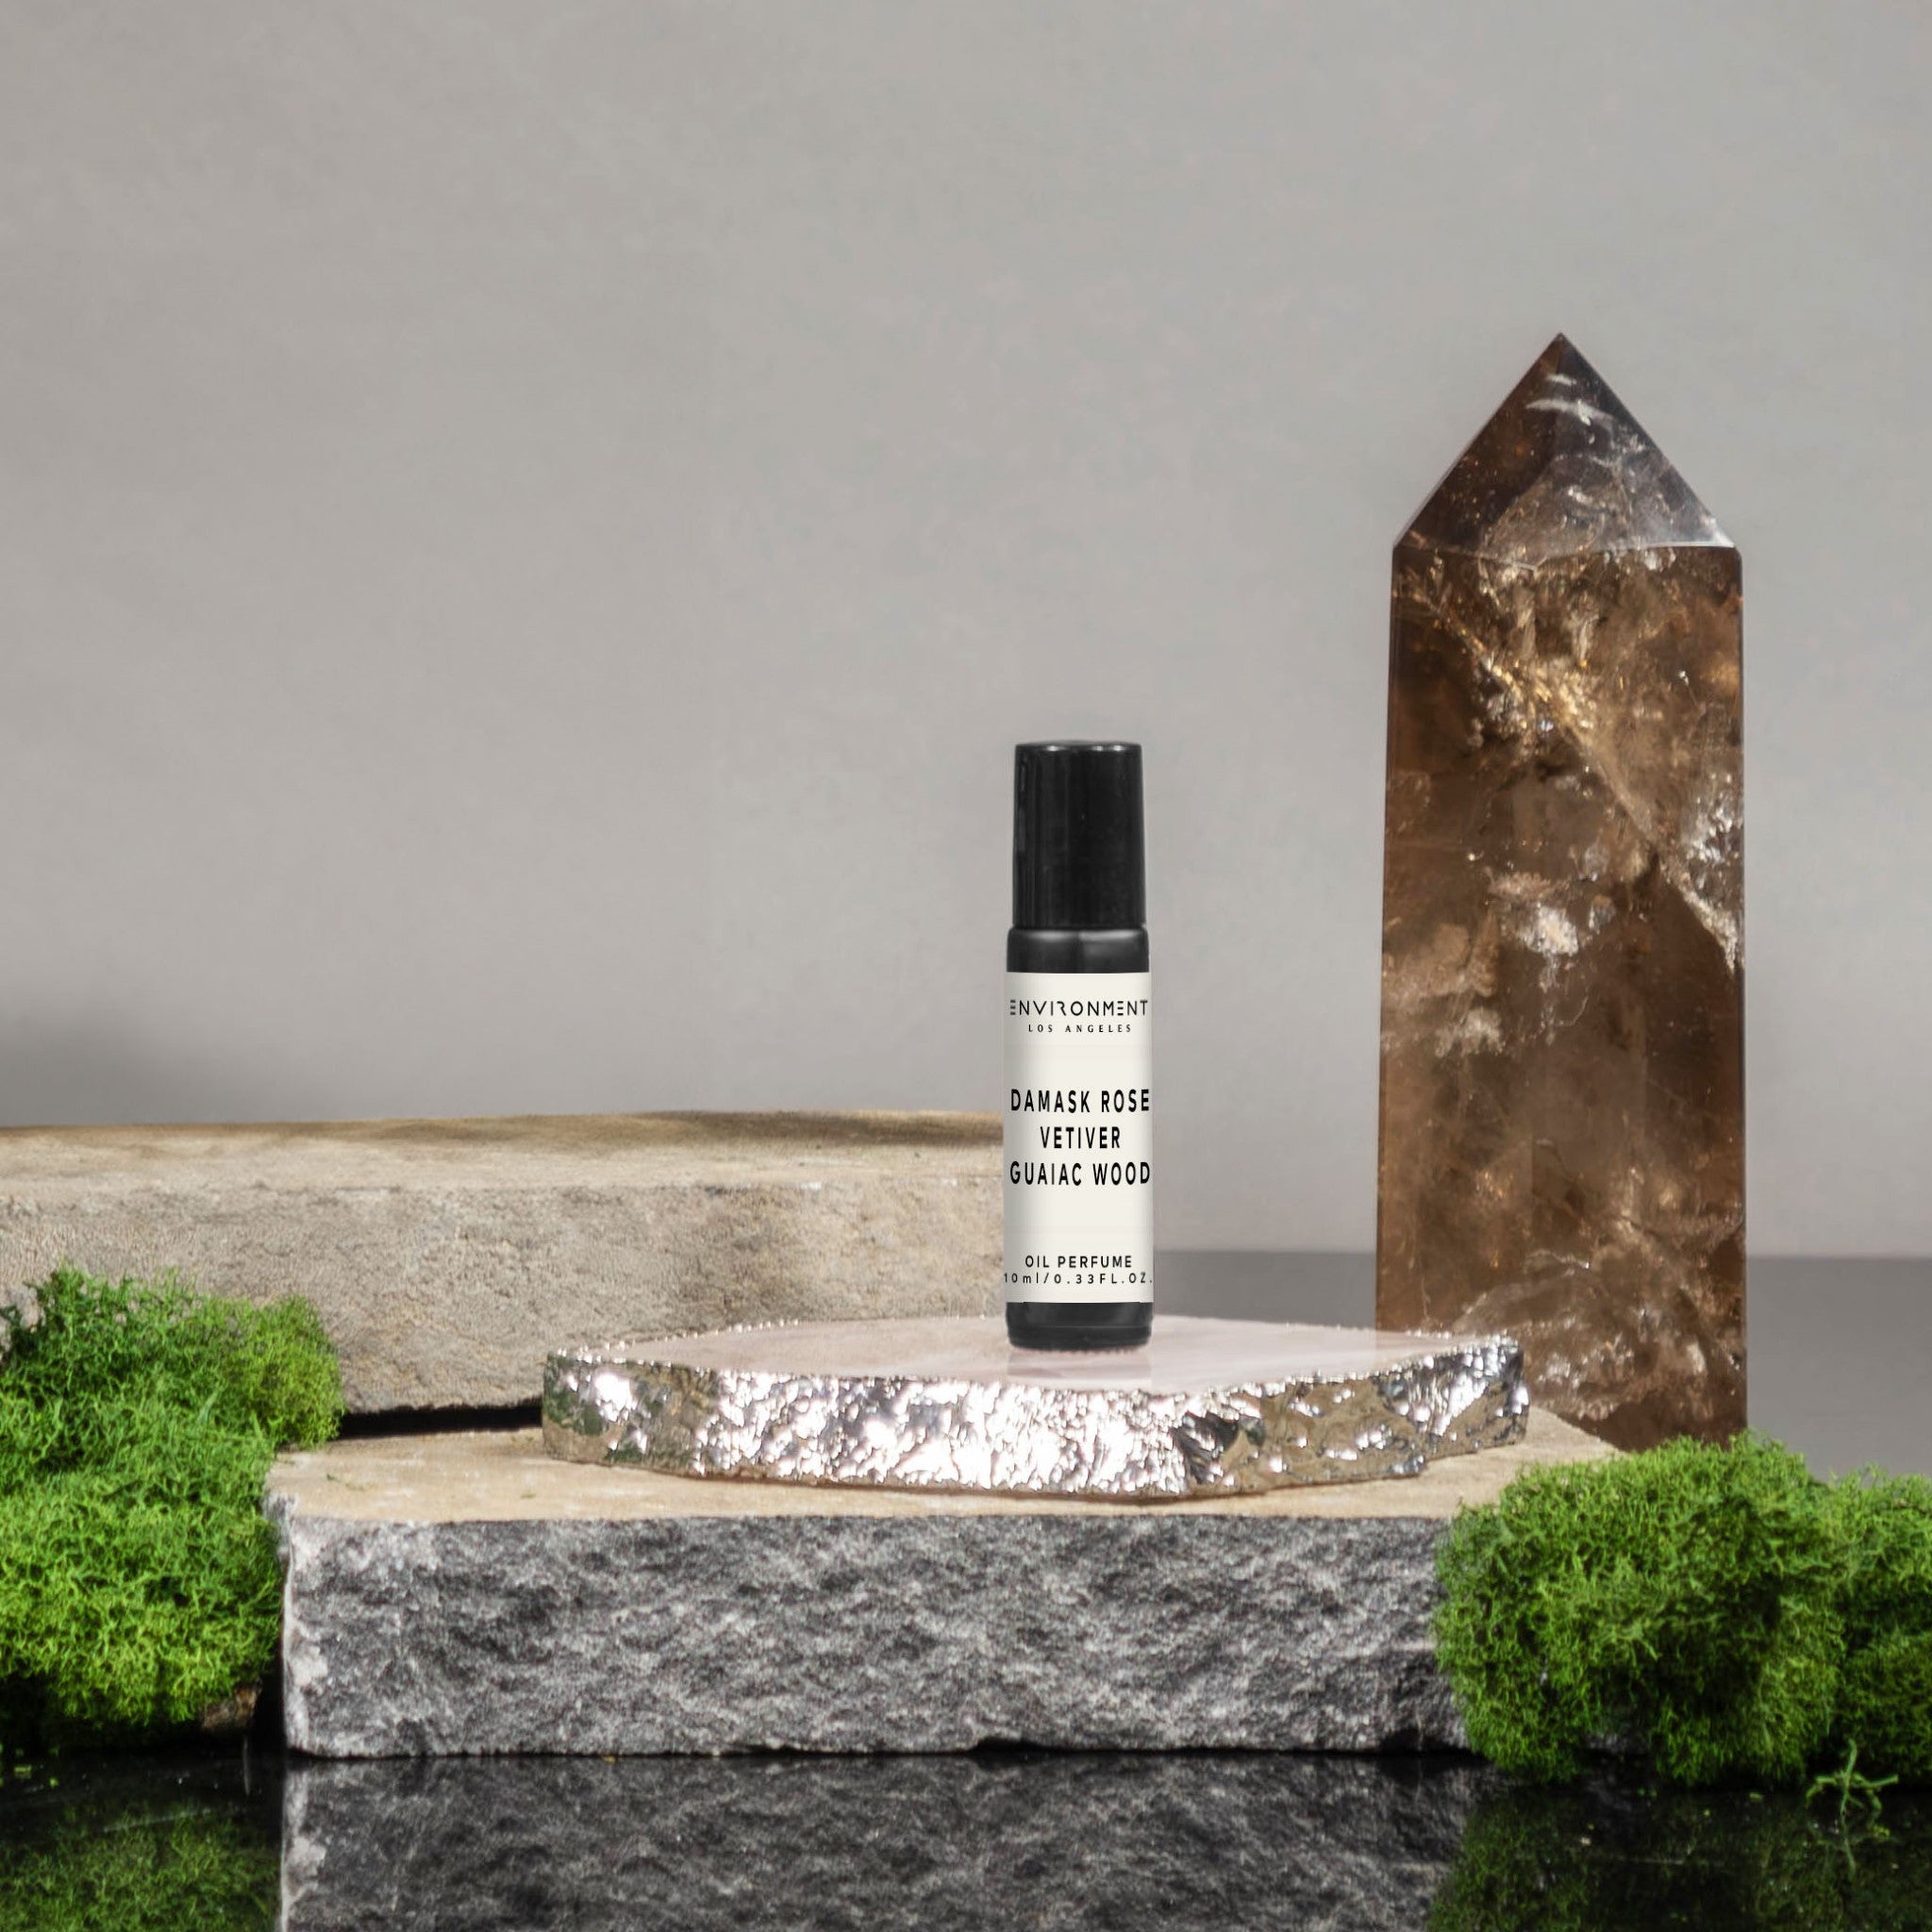 Damask Rose | Vetiver | Guaiac Wood Roll-on Oil Perfume (Inspired by Le Labo Rose 31® and Fairmont Hotel®)